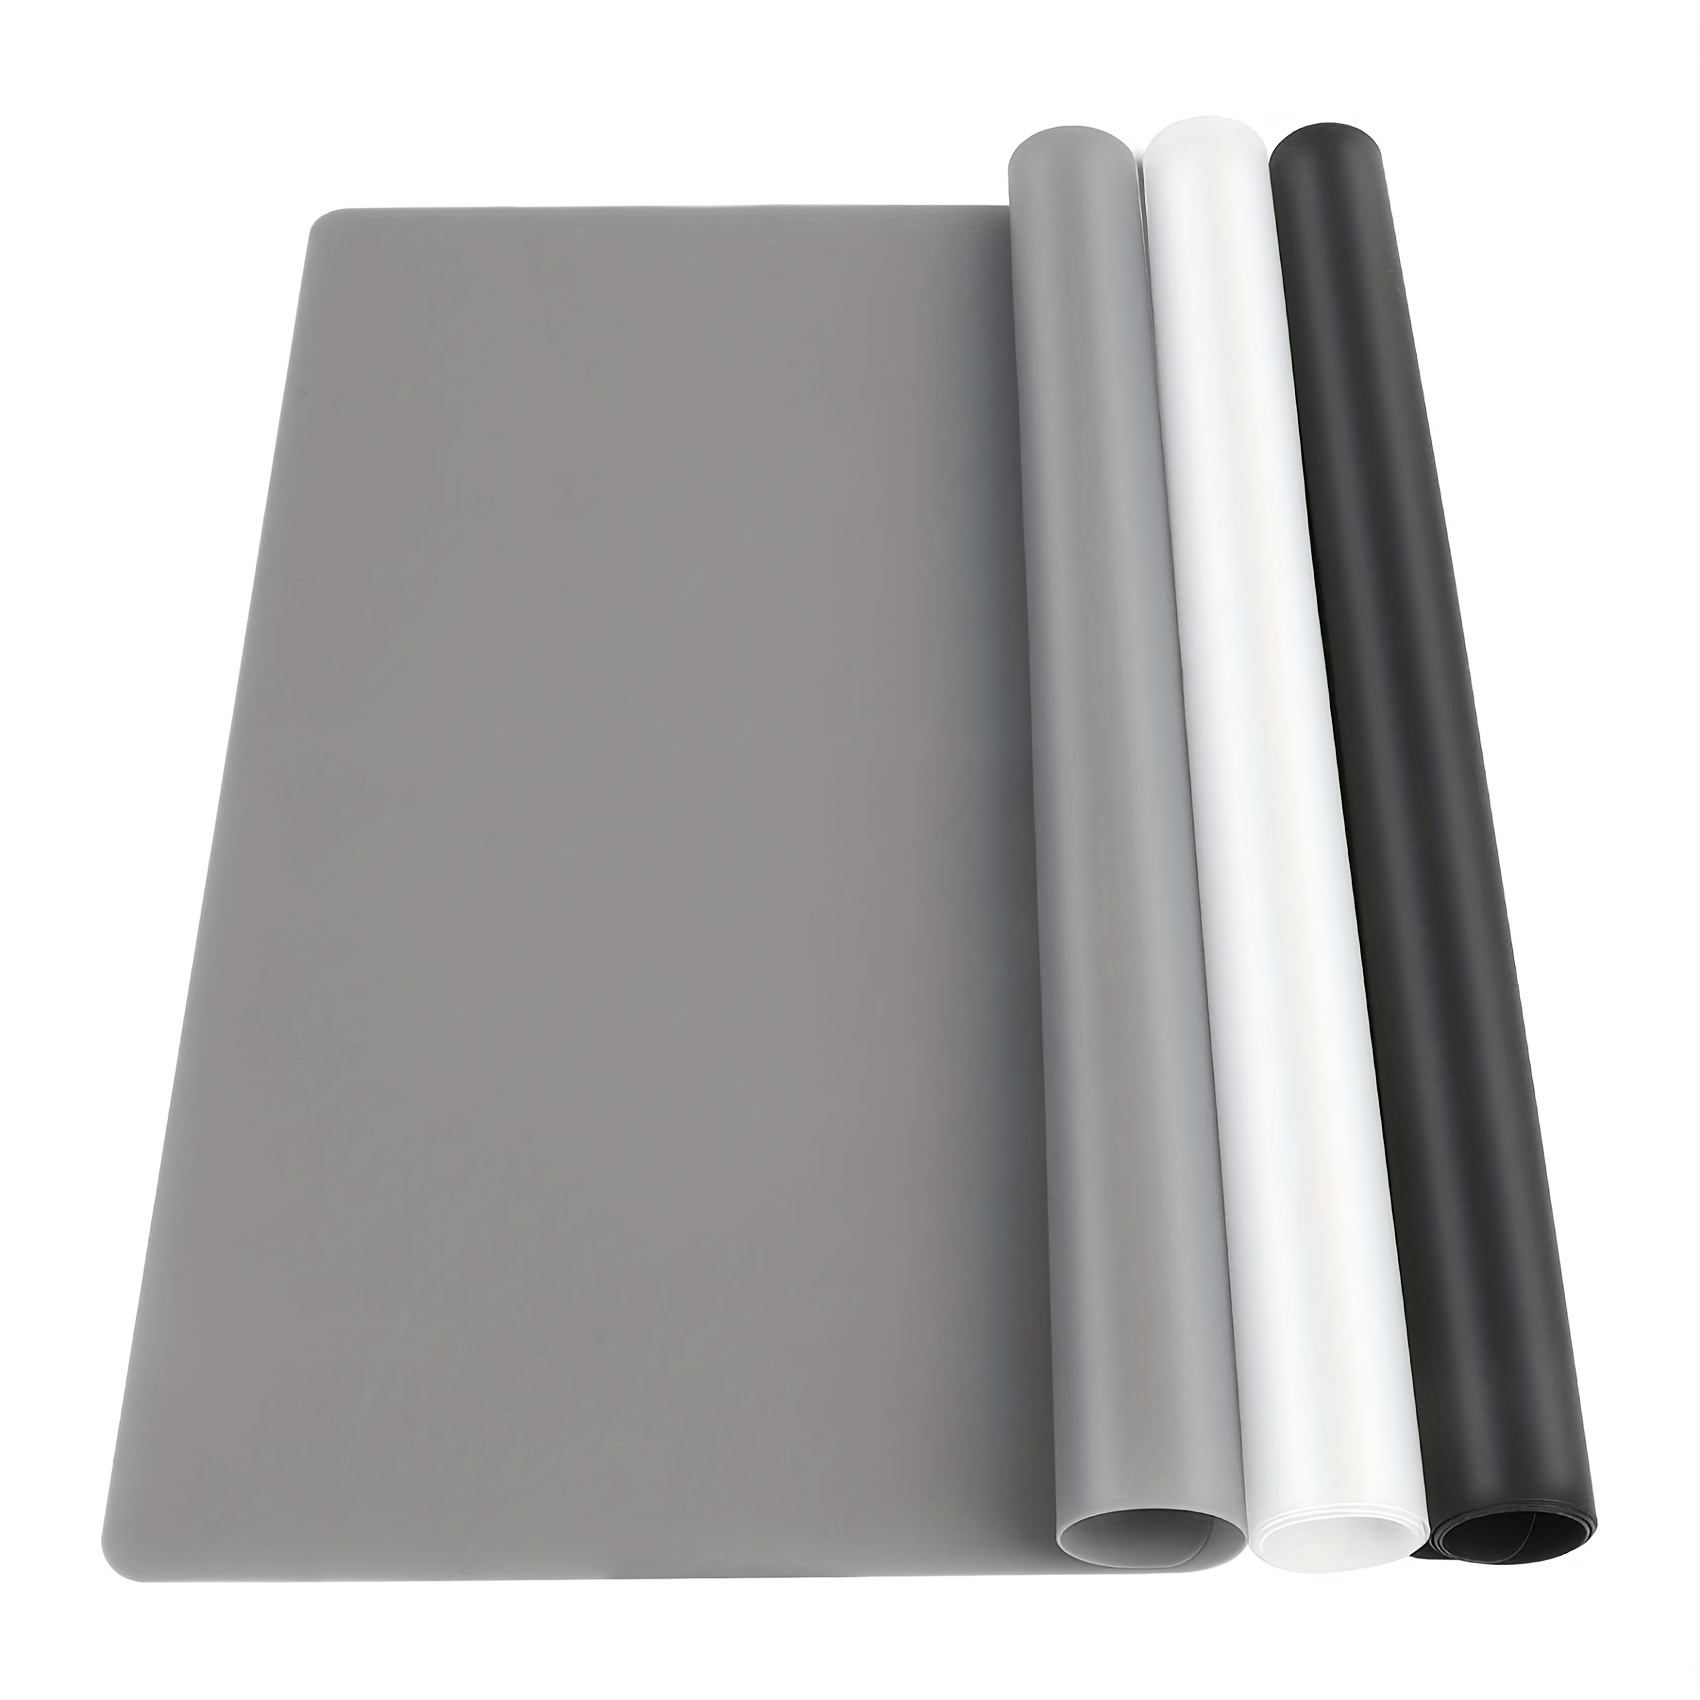 Large Heat Resistant Countertop Protector, Silicone Mat for Kitchen Counter  Top, Table Protector for Crafts, 60x40cm, 40x30cm